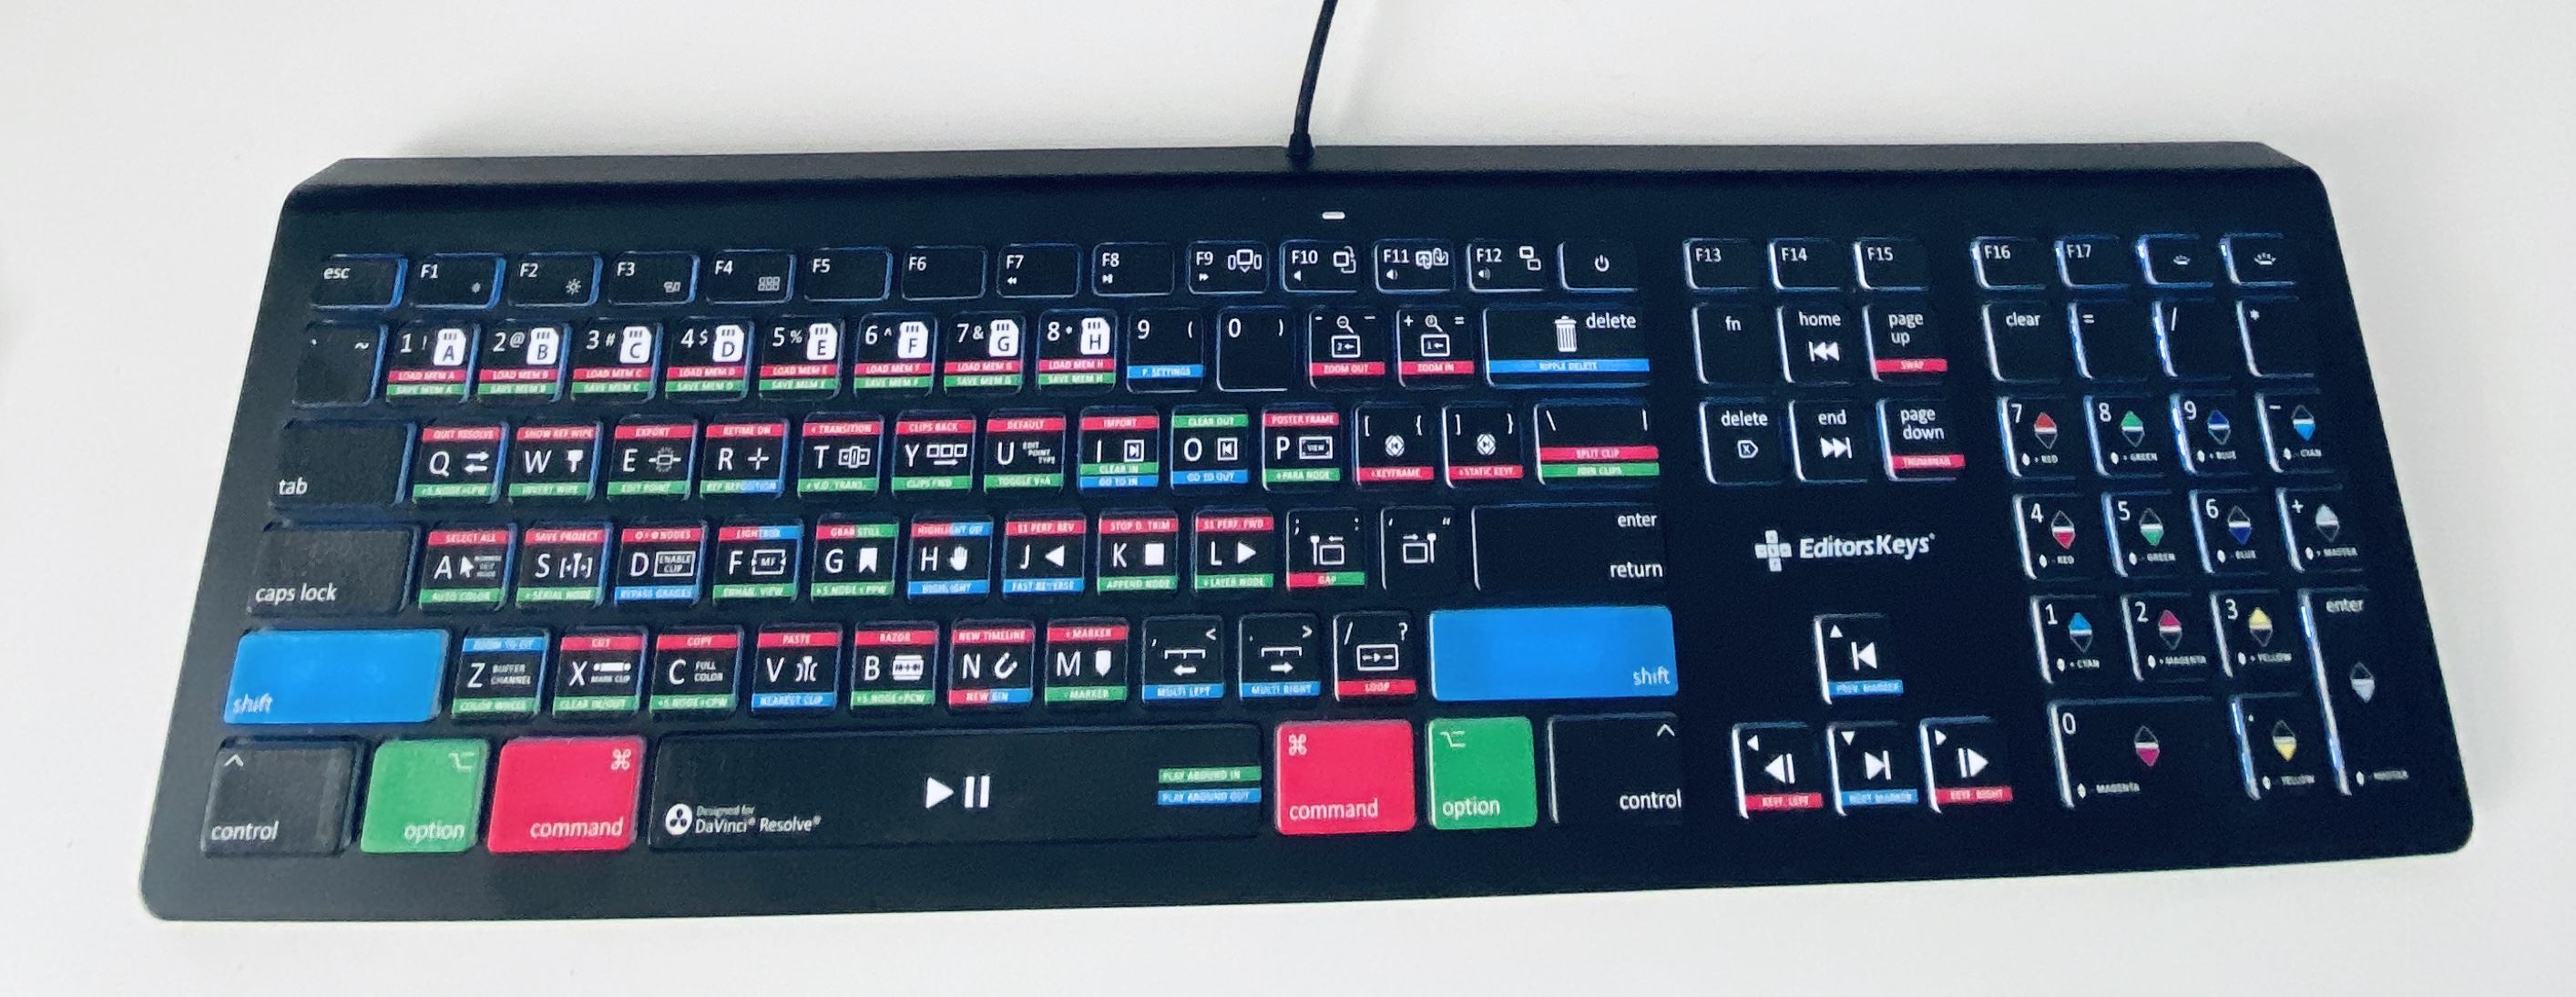 The OTHER DaVinci Resolve keyboard that can be used for editing 7